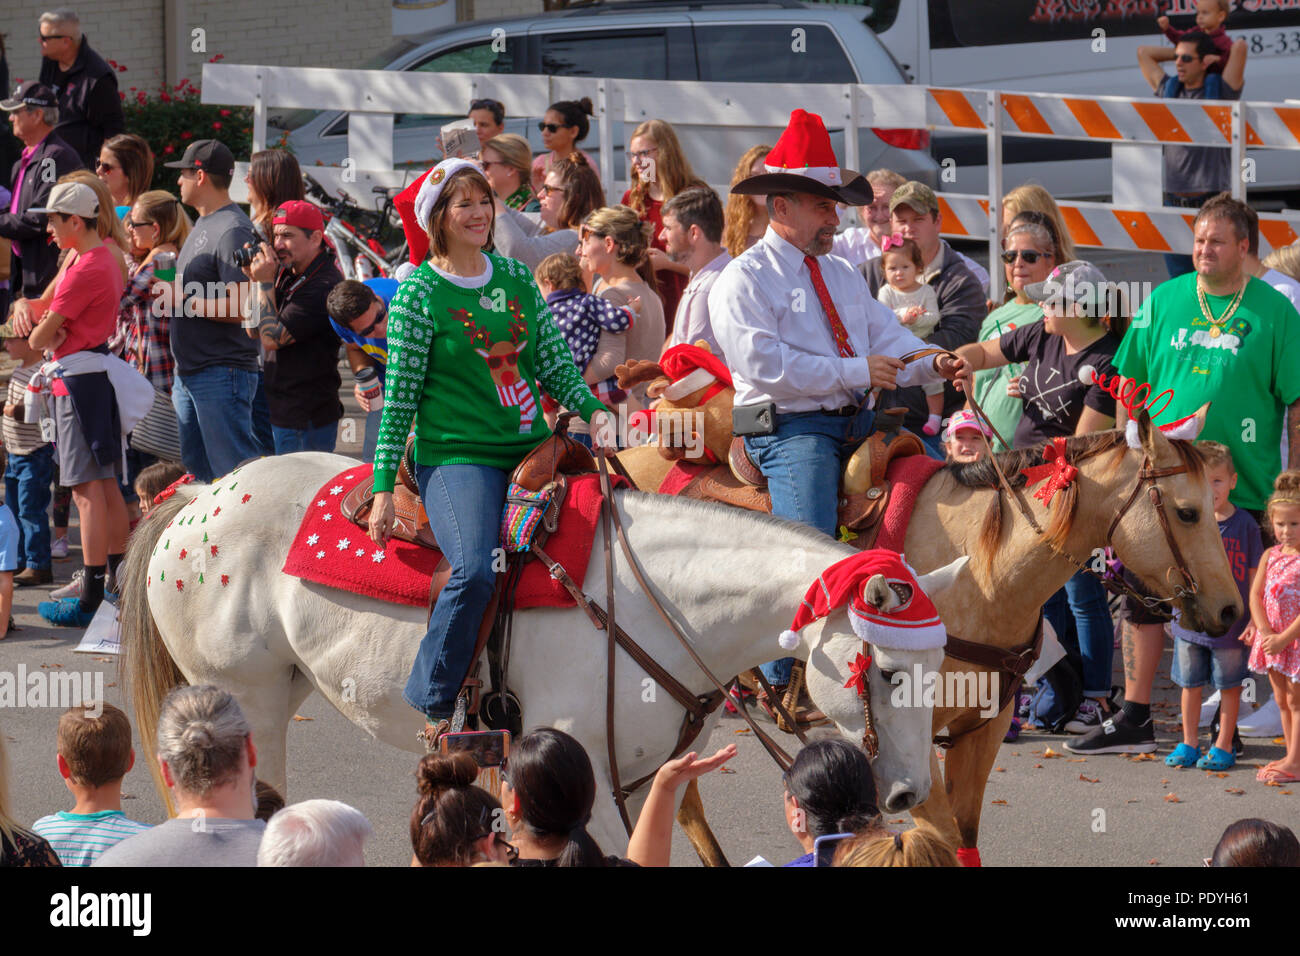 Two horse back riders with Christmas hats in Georgetown, Texas annual Christmas parade with crowds looking on. Stock Photo